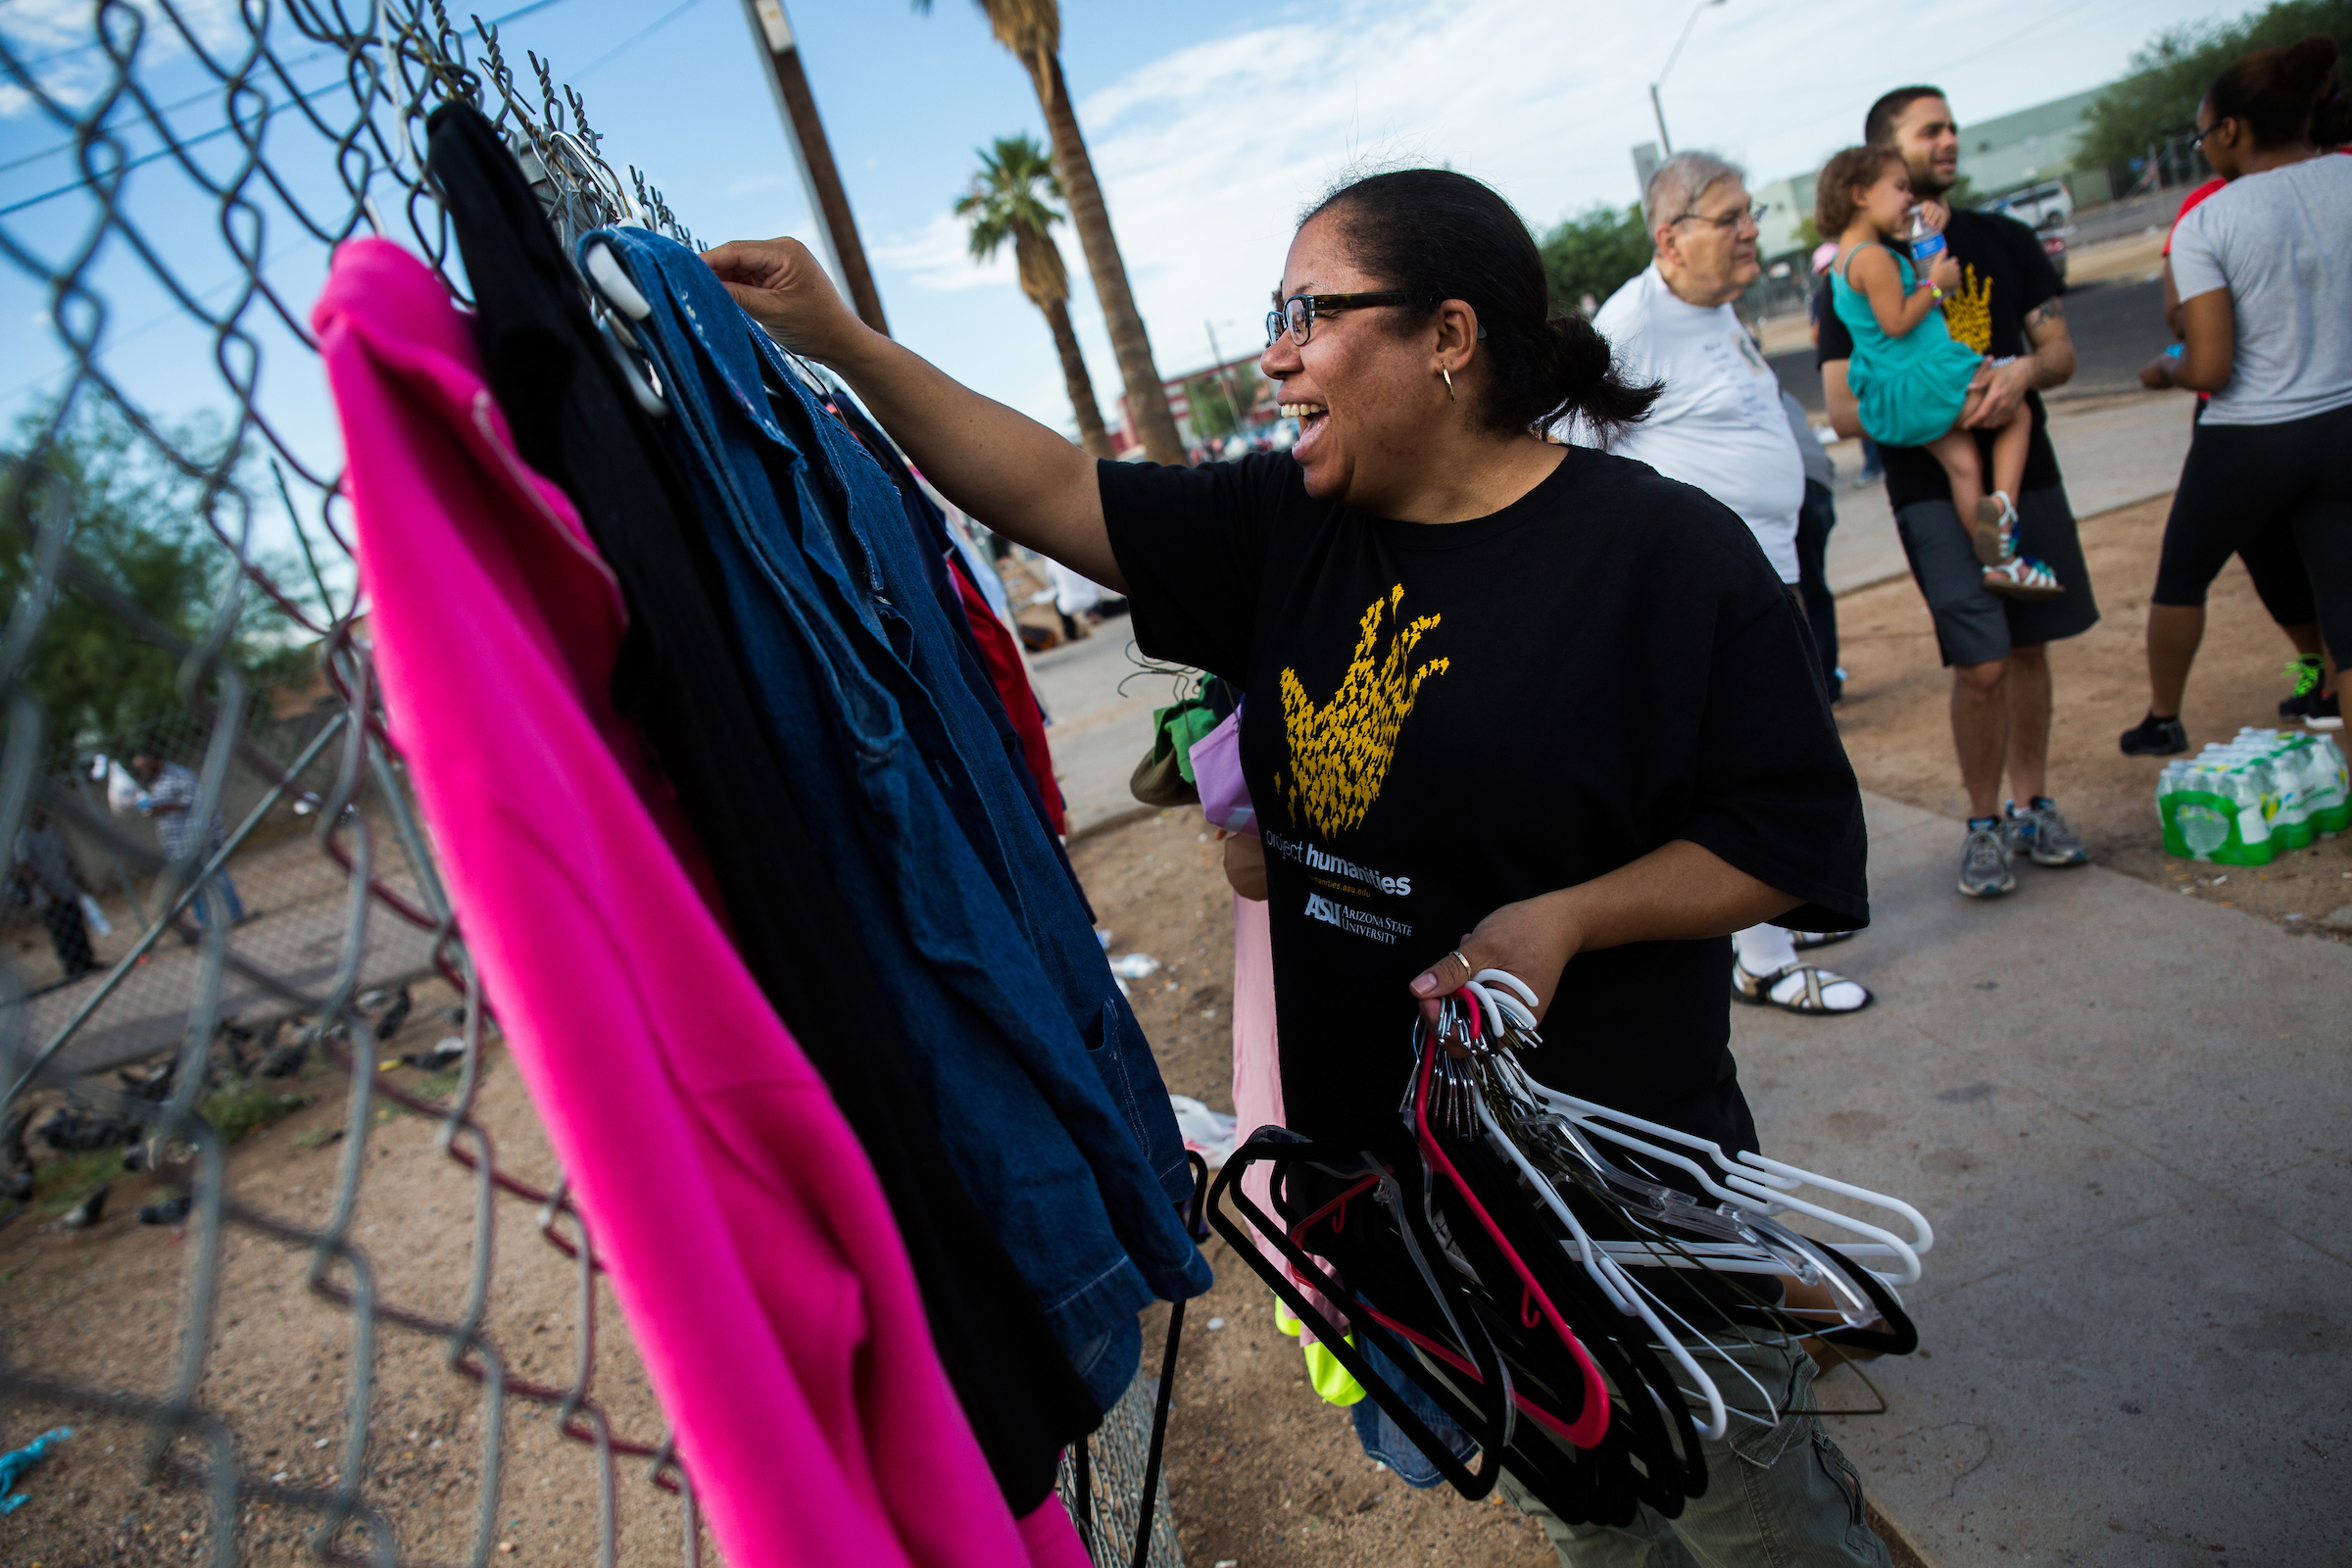 A woman smiles as she takes shirts and hangers off a fence